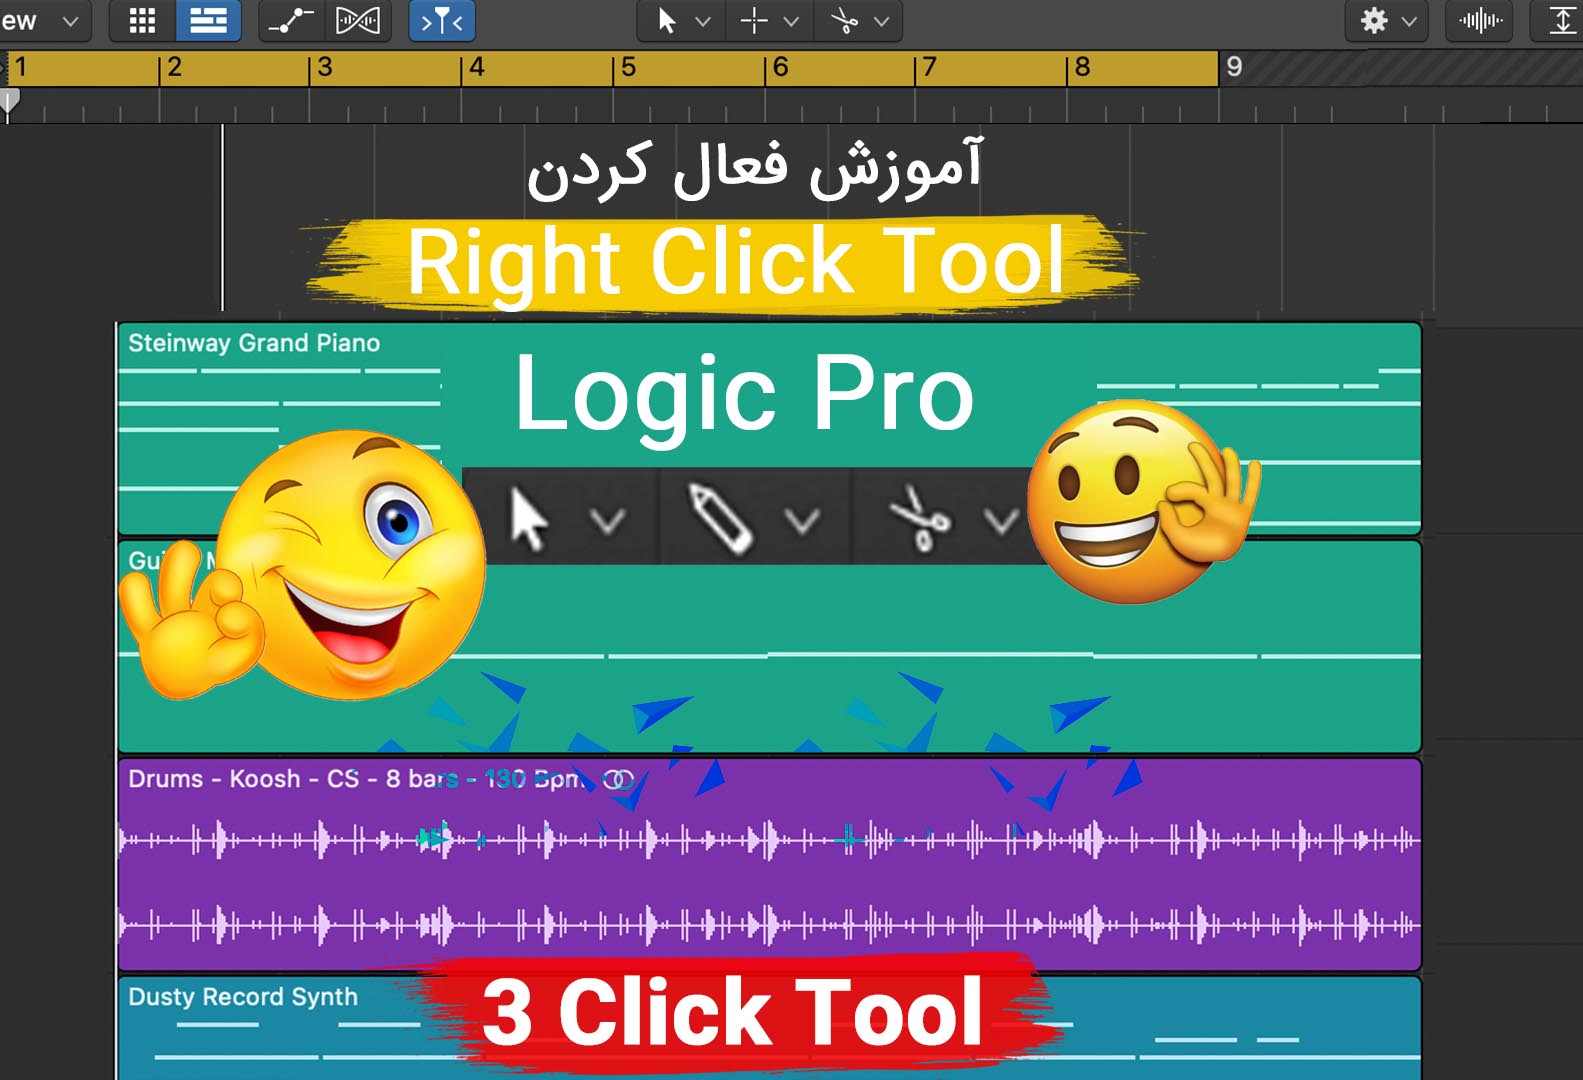 Right Click Tool در لاجیک پرو آموزش فعال کردن Right Click Tool در لاجیک پرو